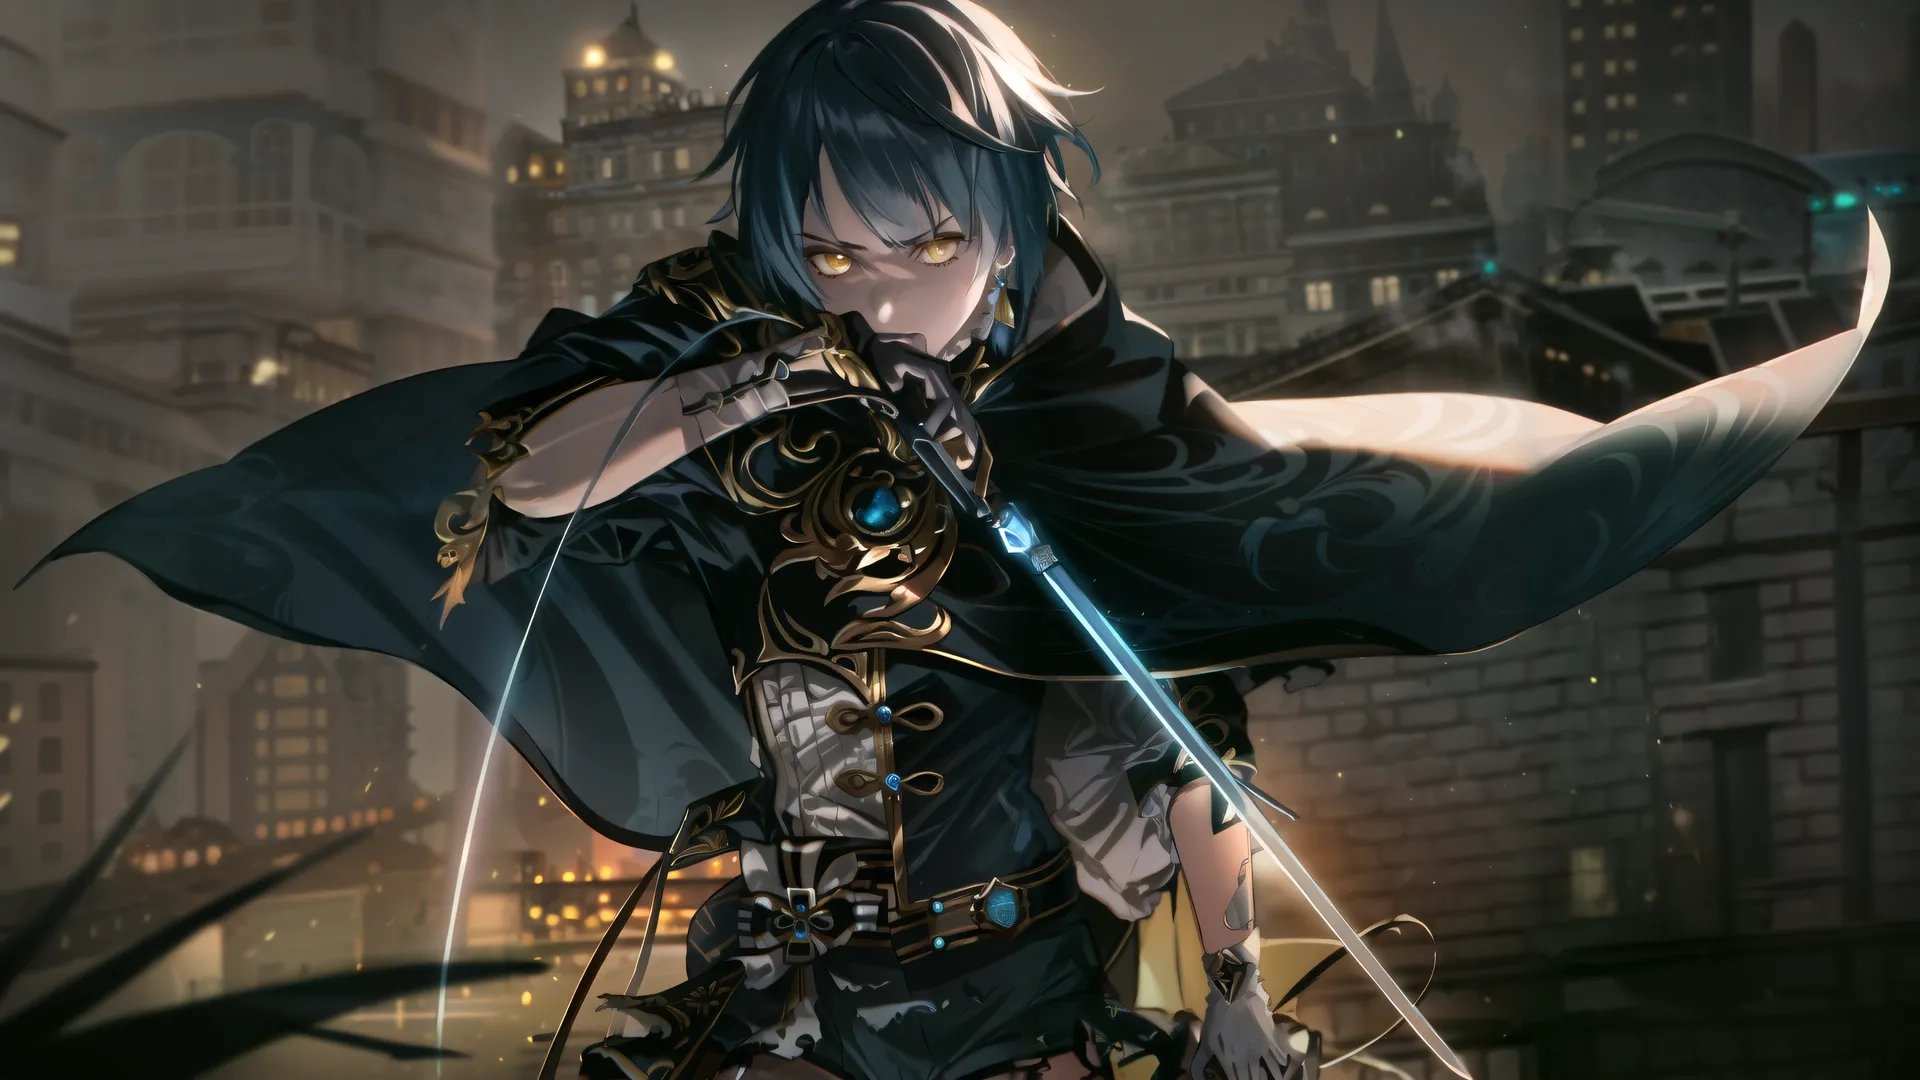 a young man with dark hair holding an angel sword in a courtyard with buildings behind him in the background, lit by dusk sun light
